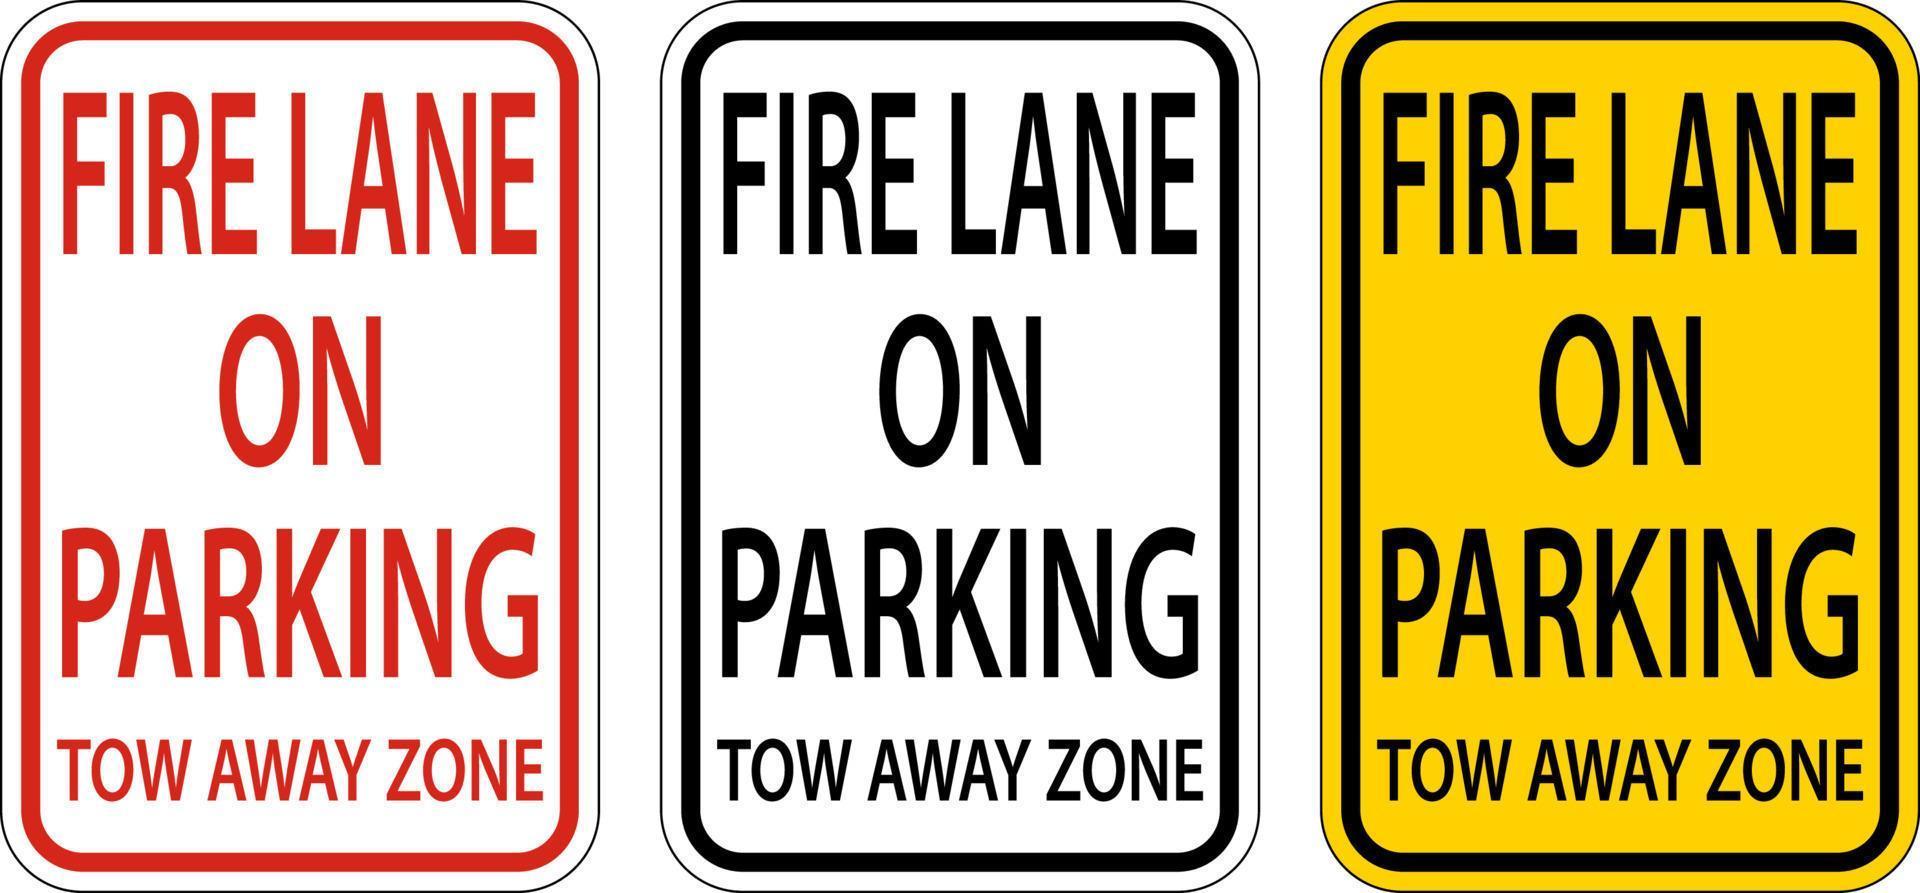 Fire Lane No Parking Tow Away Zone Sign On White Background vector